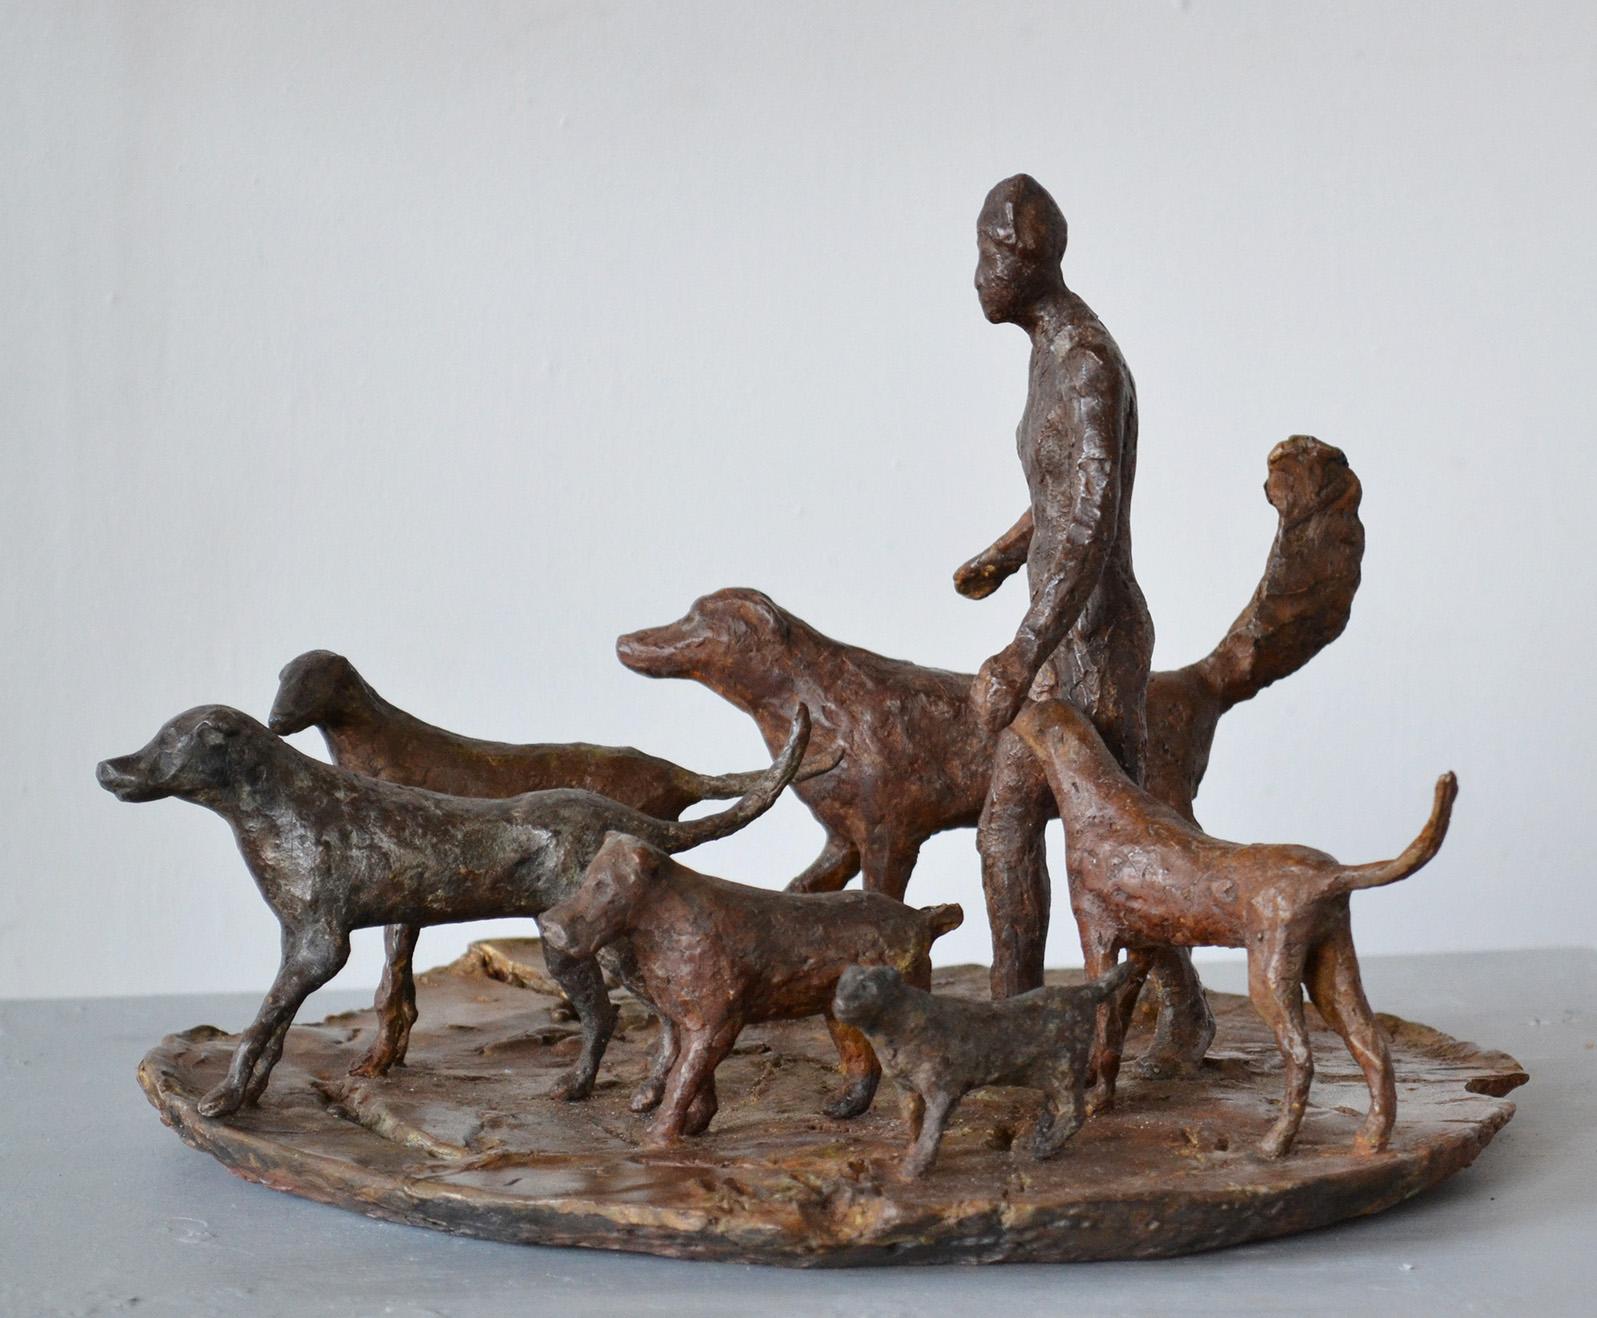 The dogs and their human companion bravely traverse an endangered earth. Cast bronze sculpture, in an edition of 5.
The human figure is 7 ½” x 4” x 2 ½”; the largest dog is 3 ½” h x 6 ½” long x 1 ¼” wide; the smallest dog is: 1 ½” x 2 ¾” x ½”, the